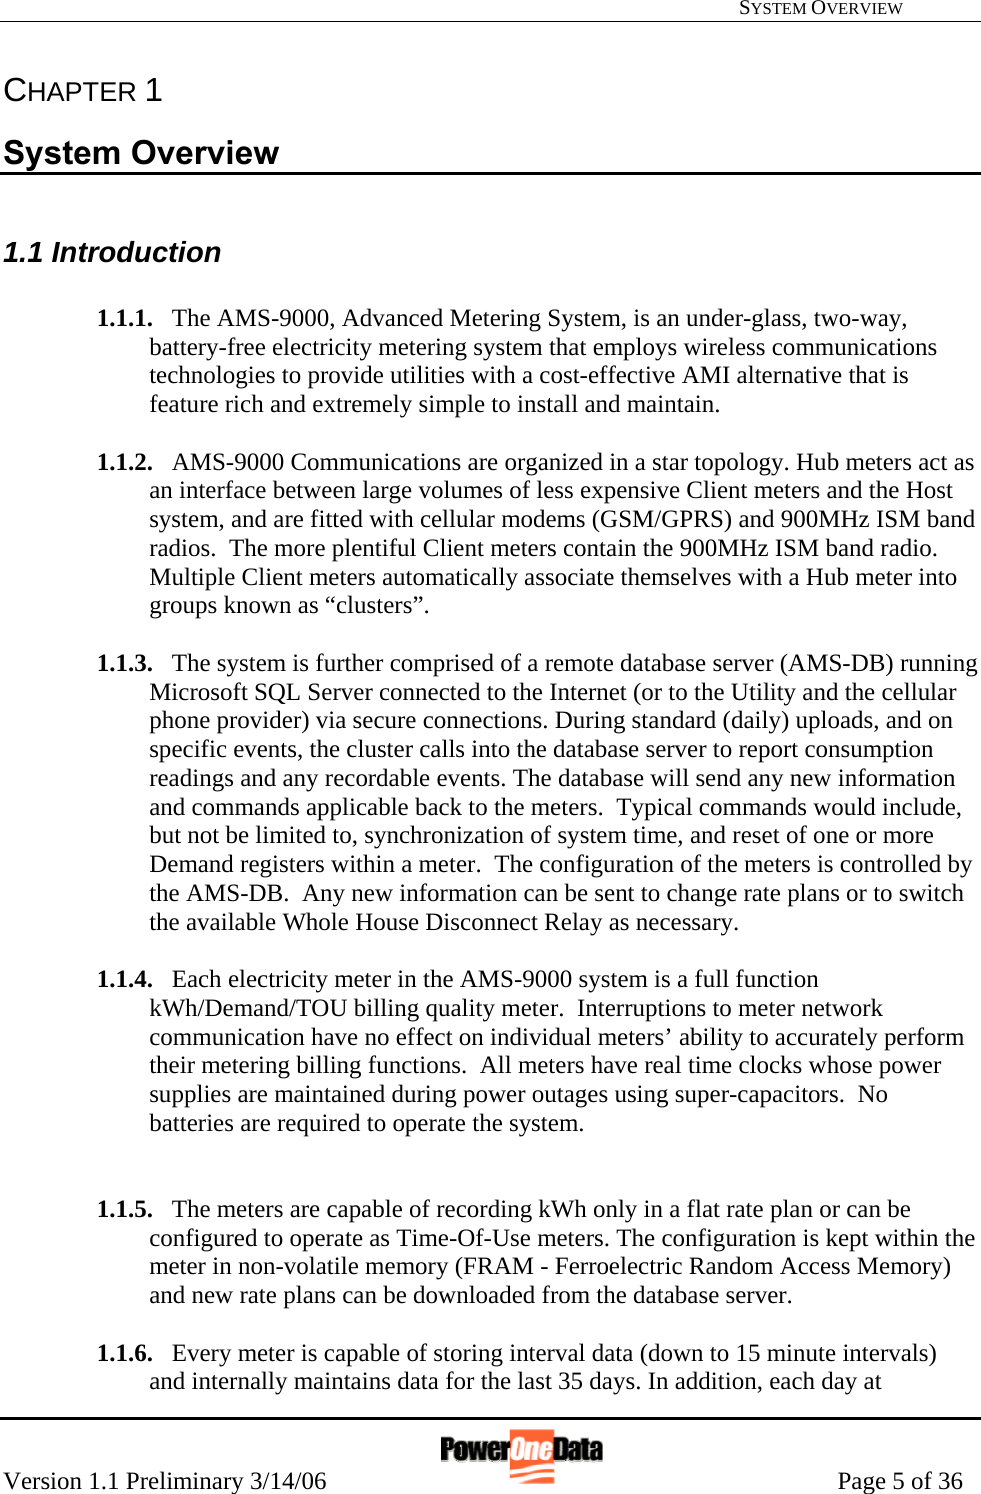   SYSTEM OVERVIEW Version 1.1 Preliminary 3/14/06                                                      Page 5 of 36 CHAPTER 1 System Overview  1.1 Introduction  1.1.1. The AMS-9000, Advanced Metering System, is an under-glass, two-way, battery-free electricity metering system that employs wireless communications technologies to provide utilities with a cost-effective AMI alternative that is feature rich and extremely simple to install and maintain.  1.1.2. AMS-9000 Communications are organized in a star topology. Hub meters act as an interface between large volumes of less expensive Client meters and the Host system, and are fitted with cellular modems (GSM/GPRS) and 900MHz ISM band radios.  The more plentiful Client meters contain the 900MHz ISM band radio. Multiple Client meters automatically associate themselves with a Hub meter into groups known as “clusters”.  1.1.3. The system is further comprised of a remote database server (AMS-DB) running Microsoft SQL Server connected to the Internet (or to the Utility and the cellular phone provider) via secure connections. During standard (daily) uploads, and on specific events, the cluster calls into the database server to report consumption readings and any recordable events. The database will send any new information and commands applicable back to the meters.  Typical commands would include, but not be limited to, synchronization of system time, and reset of one or more Demand registers within a meter.  The configuration of the meters is controlled by the AMS-DB.  Any new information can be sent to change rate plans or to switch the available Whole House Disconnect Relay as necessary.  1.1.4. Each electricity meter in the AMS-9000 system is a full function kWh/Demand/TOU billing quality meter.  Interruptions to meter network communication have no effect on individual meters’ ability to accurately perform their metering billing functions.  All meters have real time clocks whose power supplies are maintained during power outages using super-capacitors.  No batteries are required to operate the system.   1.1.5. The meters are capable of recording kWh only in a flat rate plan or can be configured to operate as Time-Of-Use meters. The configuration is kept within the meter in non-volatile memory (FRAM - Ferroelectric Random Access Memory) and new rate plans can be downloaded from the database server.  1.1.6. Every meter is capable of storing interval data (down to 15 minute intervals) and internally maintains data for the last 35 days. In addition, each day at 